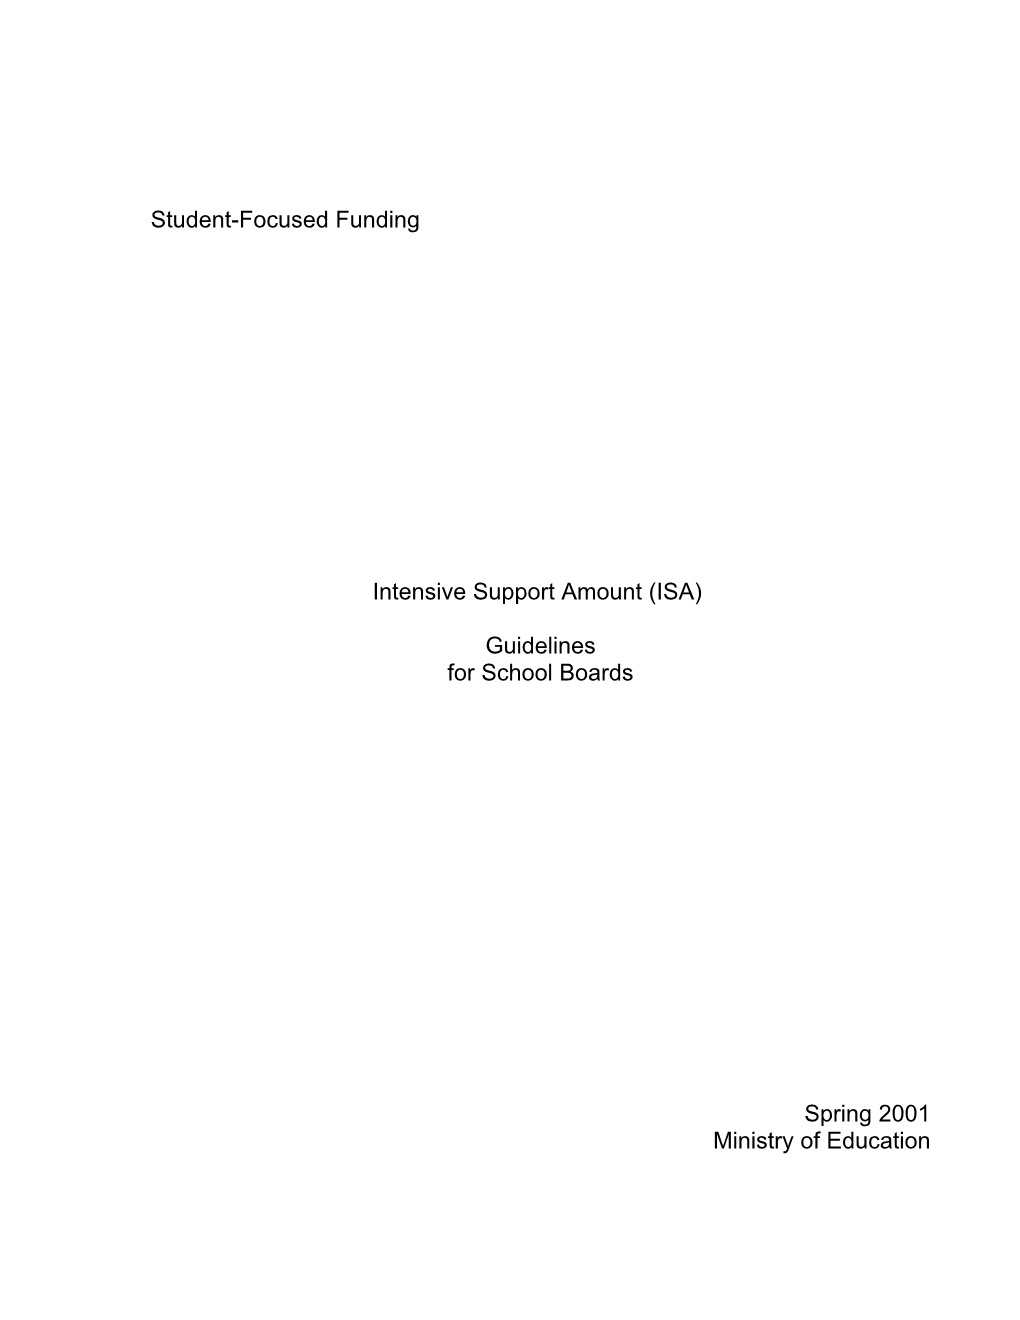 Student-Focused Funding Intensive Support Amount (ISA)